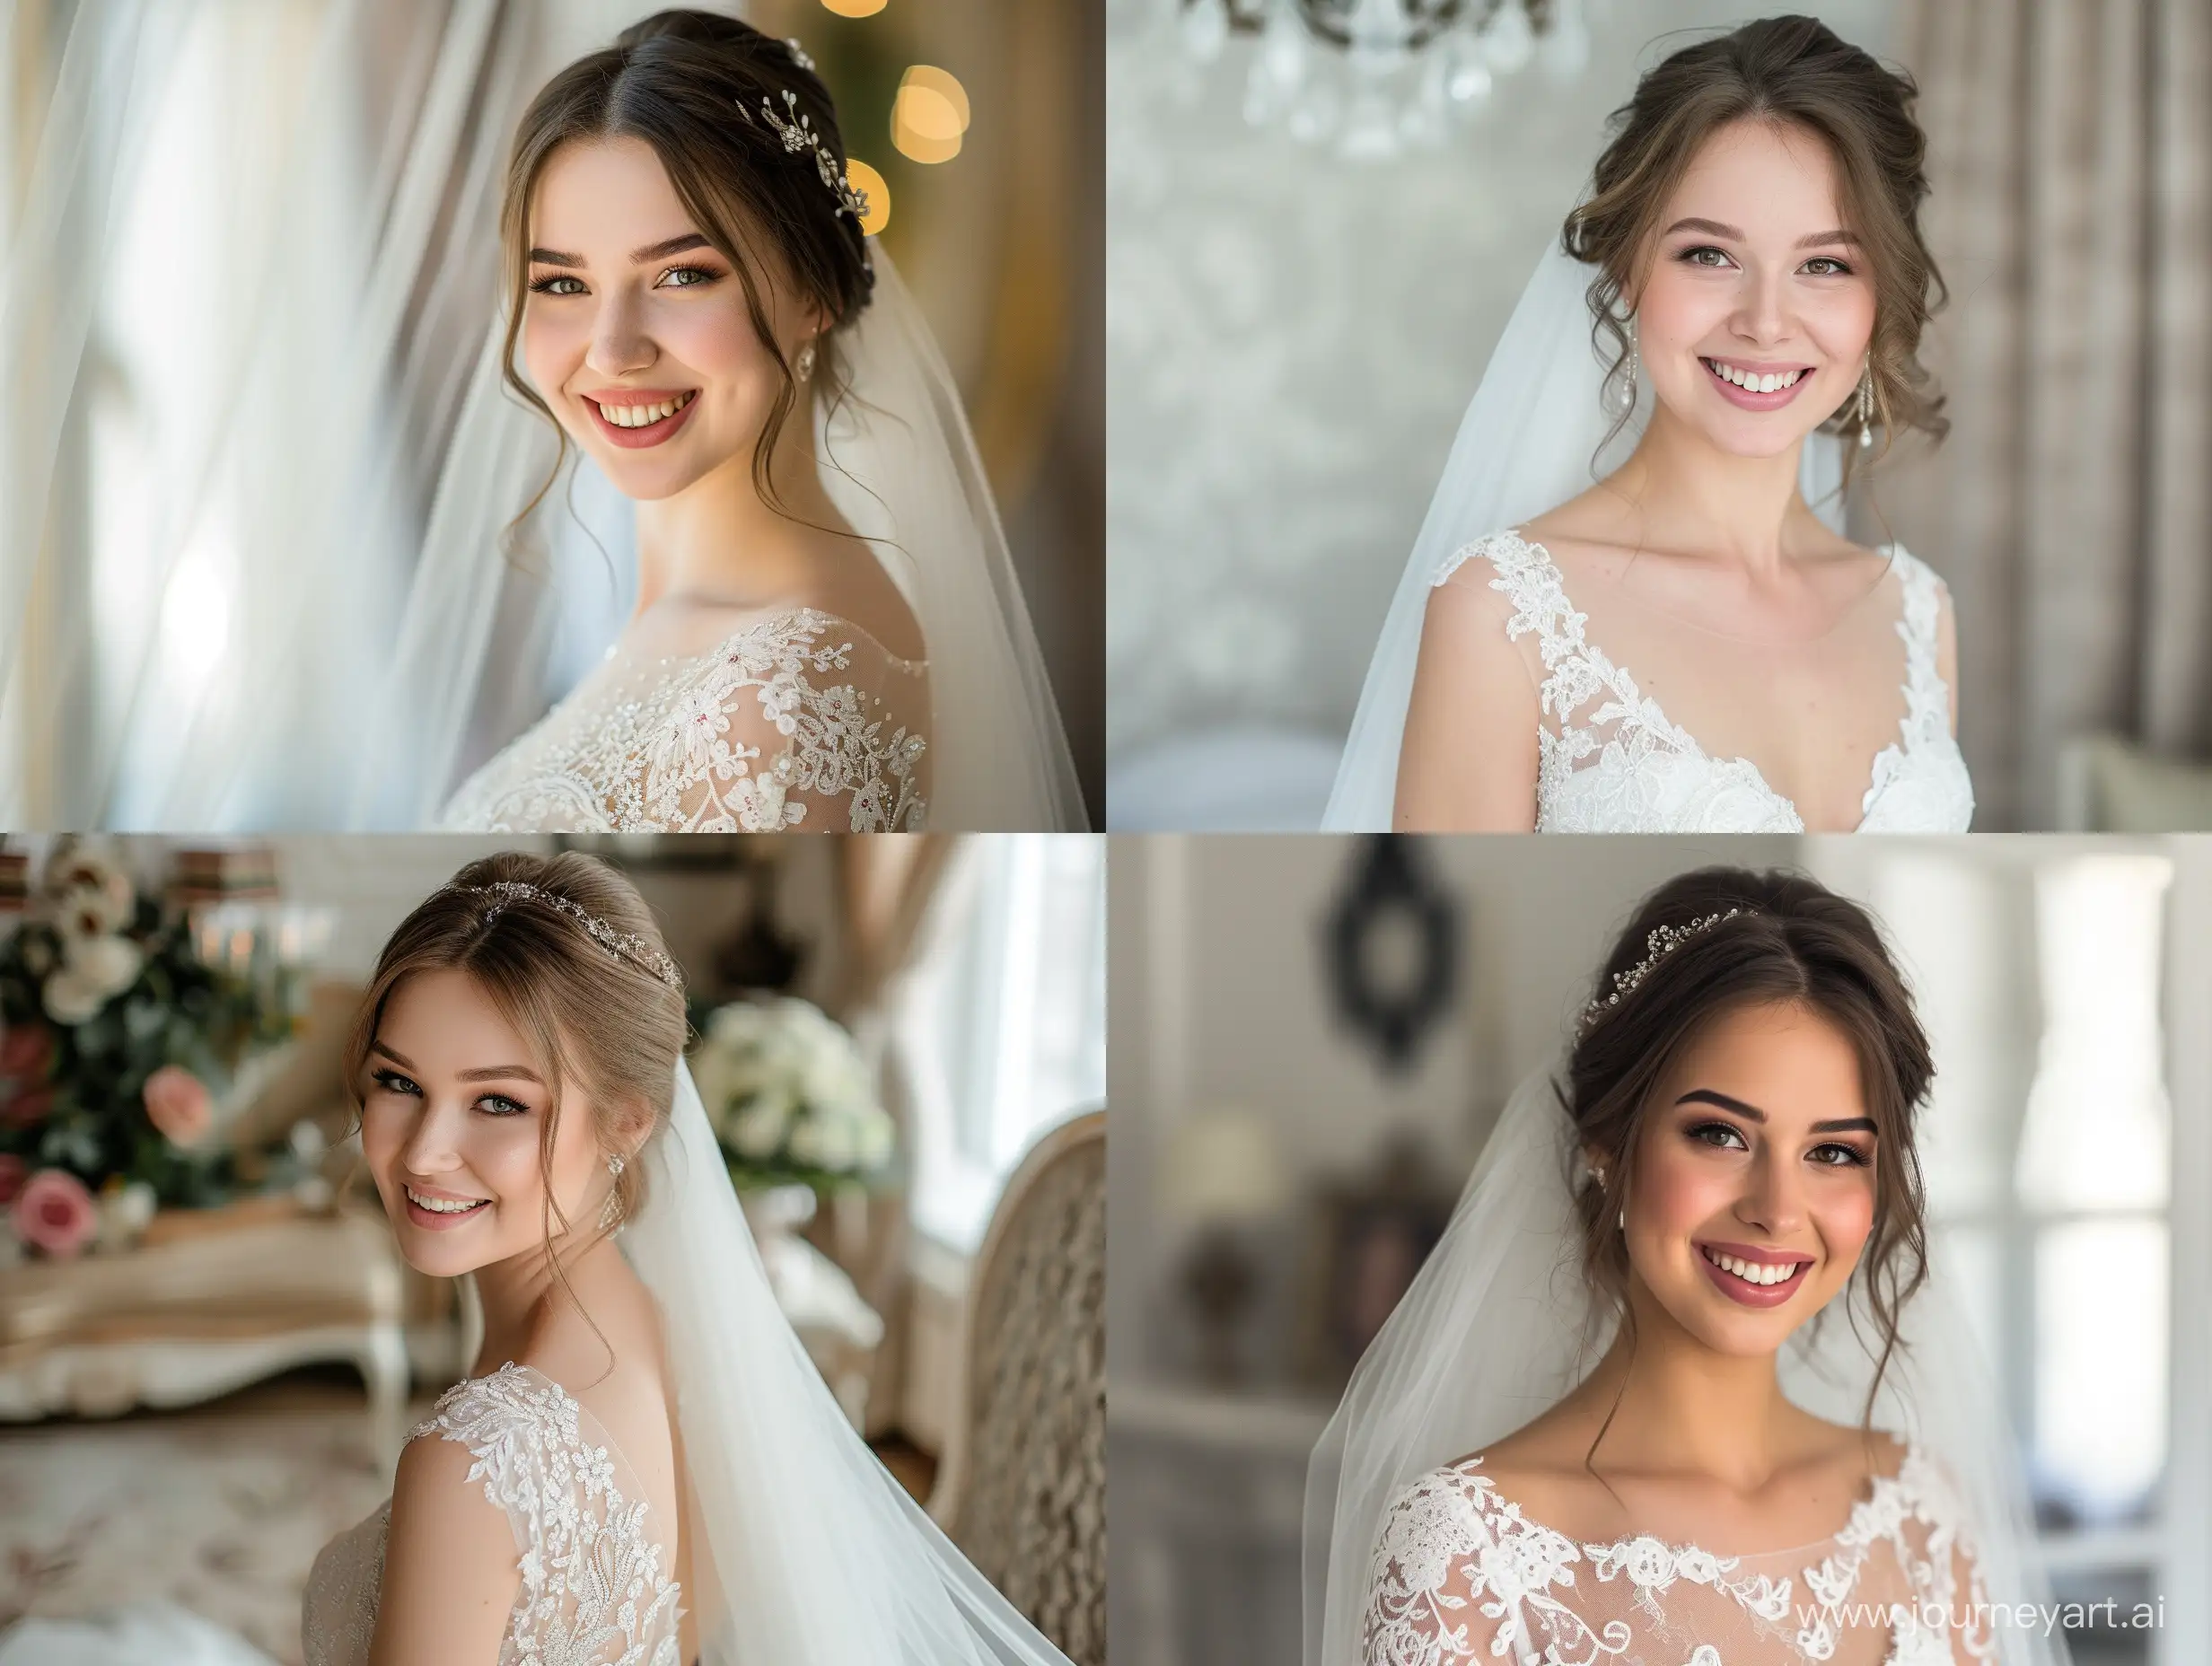 A beautiful Russian bride with a smile, wedding dress, gorgeous attire, luxurious and clean scenes, character photography, professional photography, looking towards the camera, front view, full body photos,